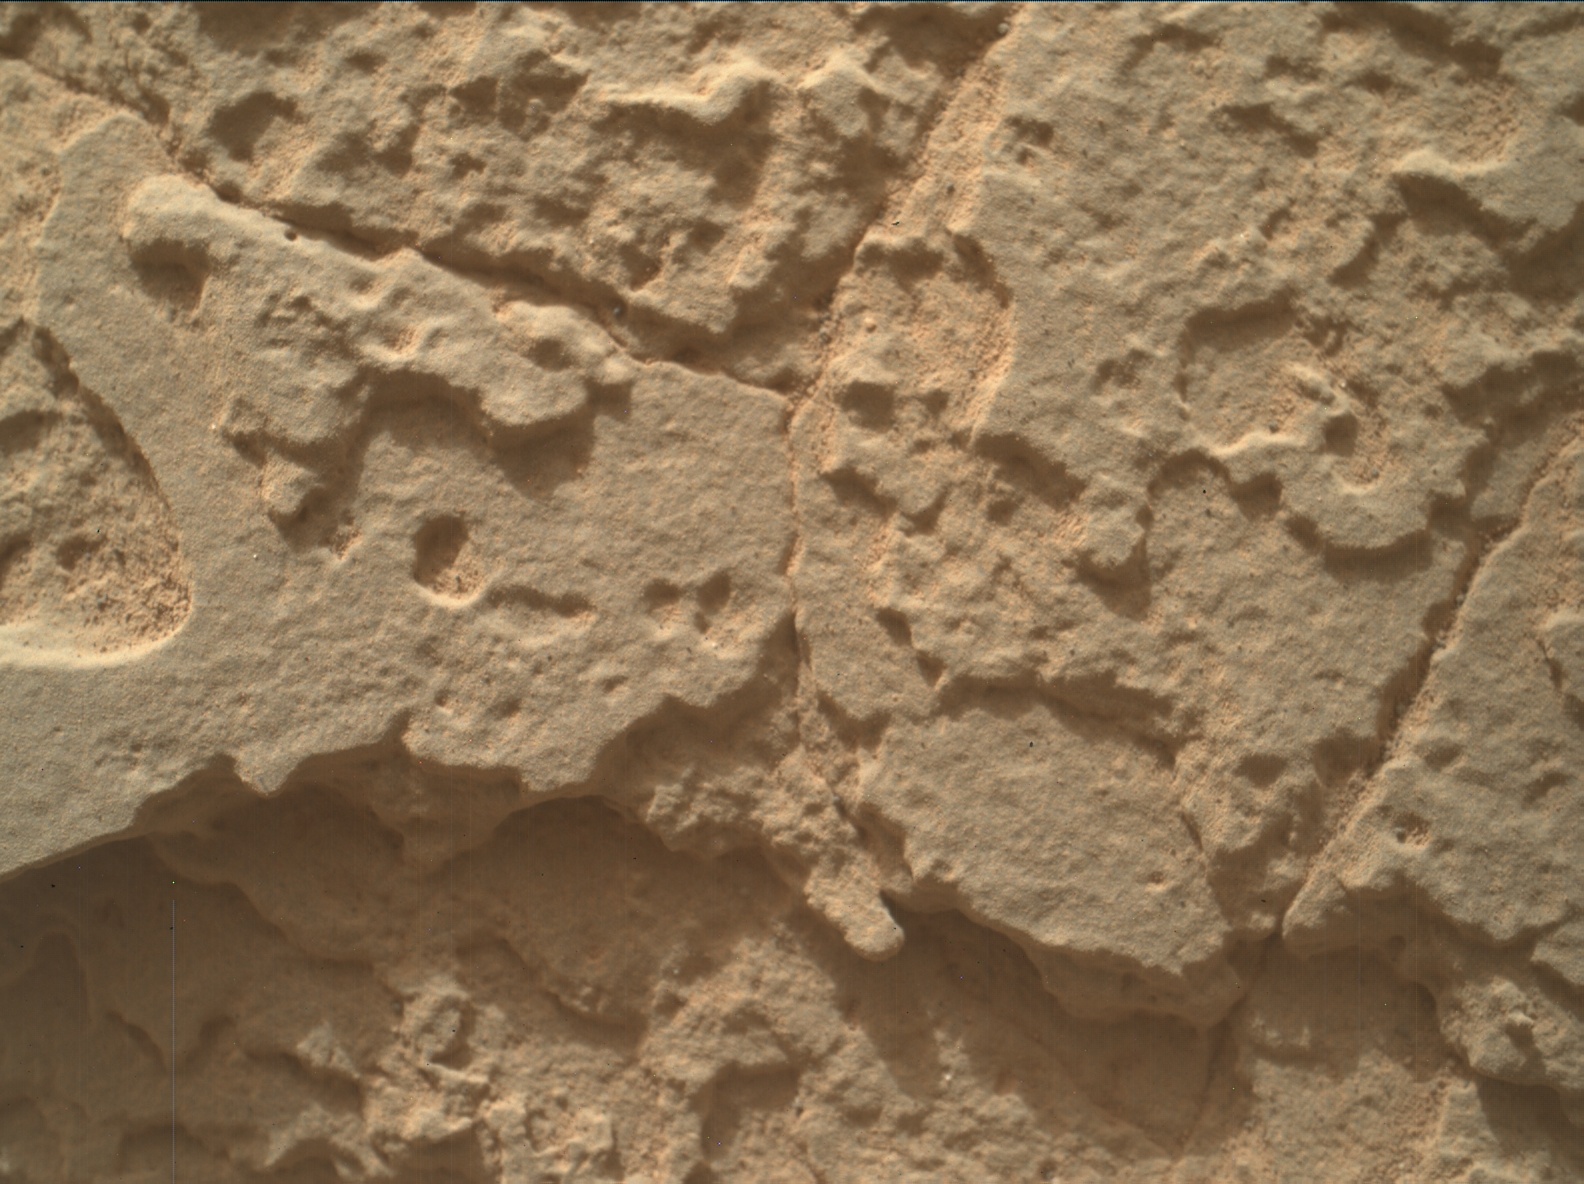 Nasa's Mars rover Curiosity acquired this image using its Mars Hand Lens Imager (MAHLI) on Sol 3392